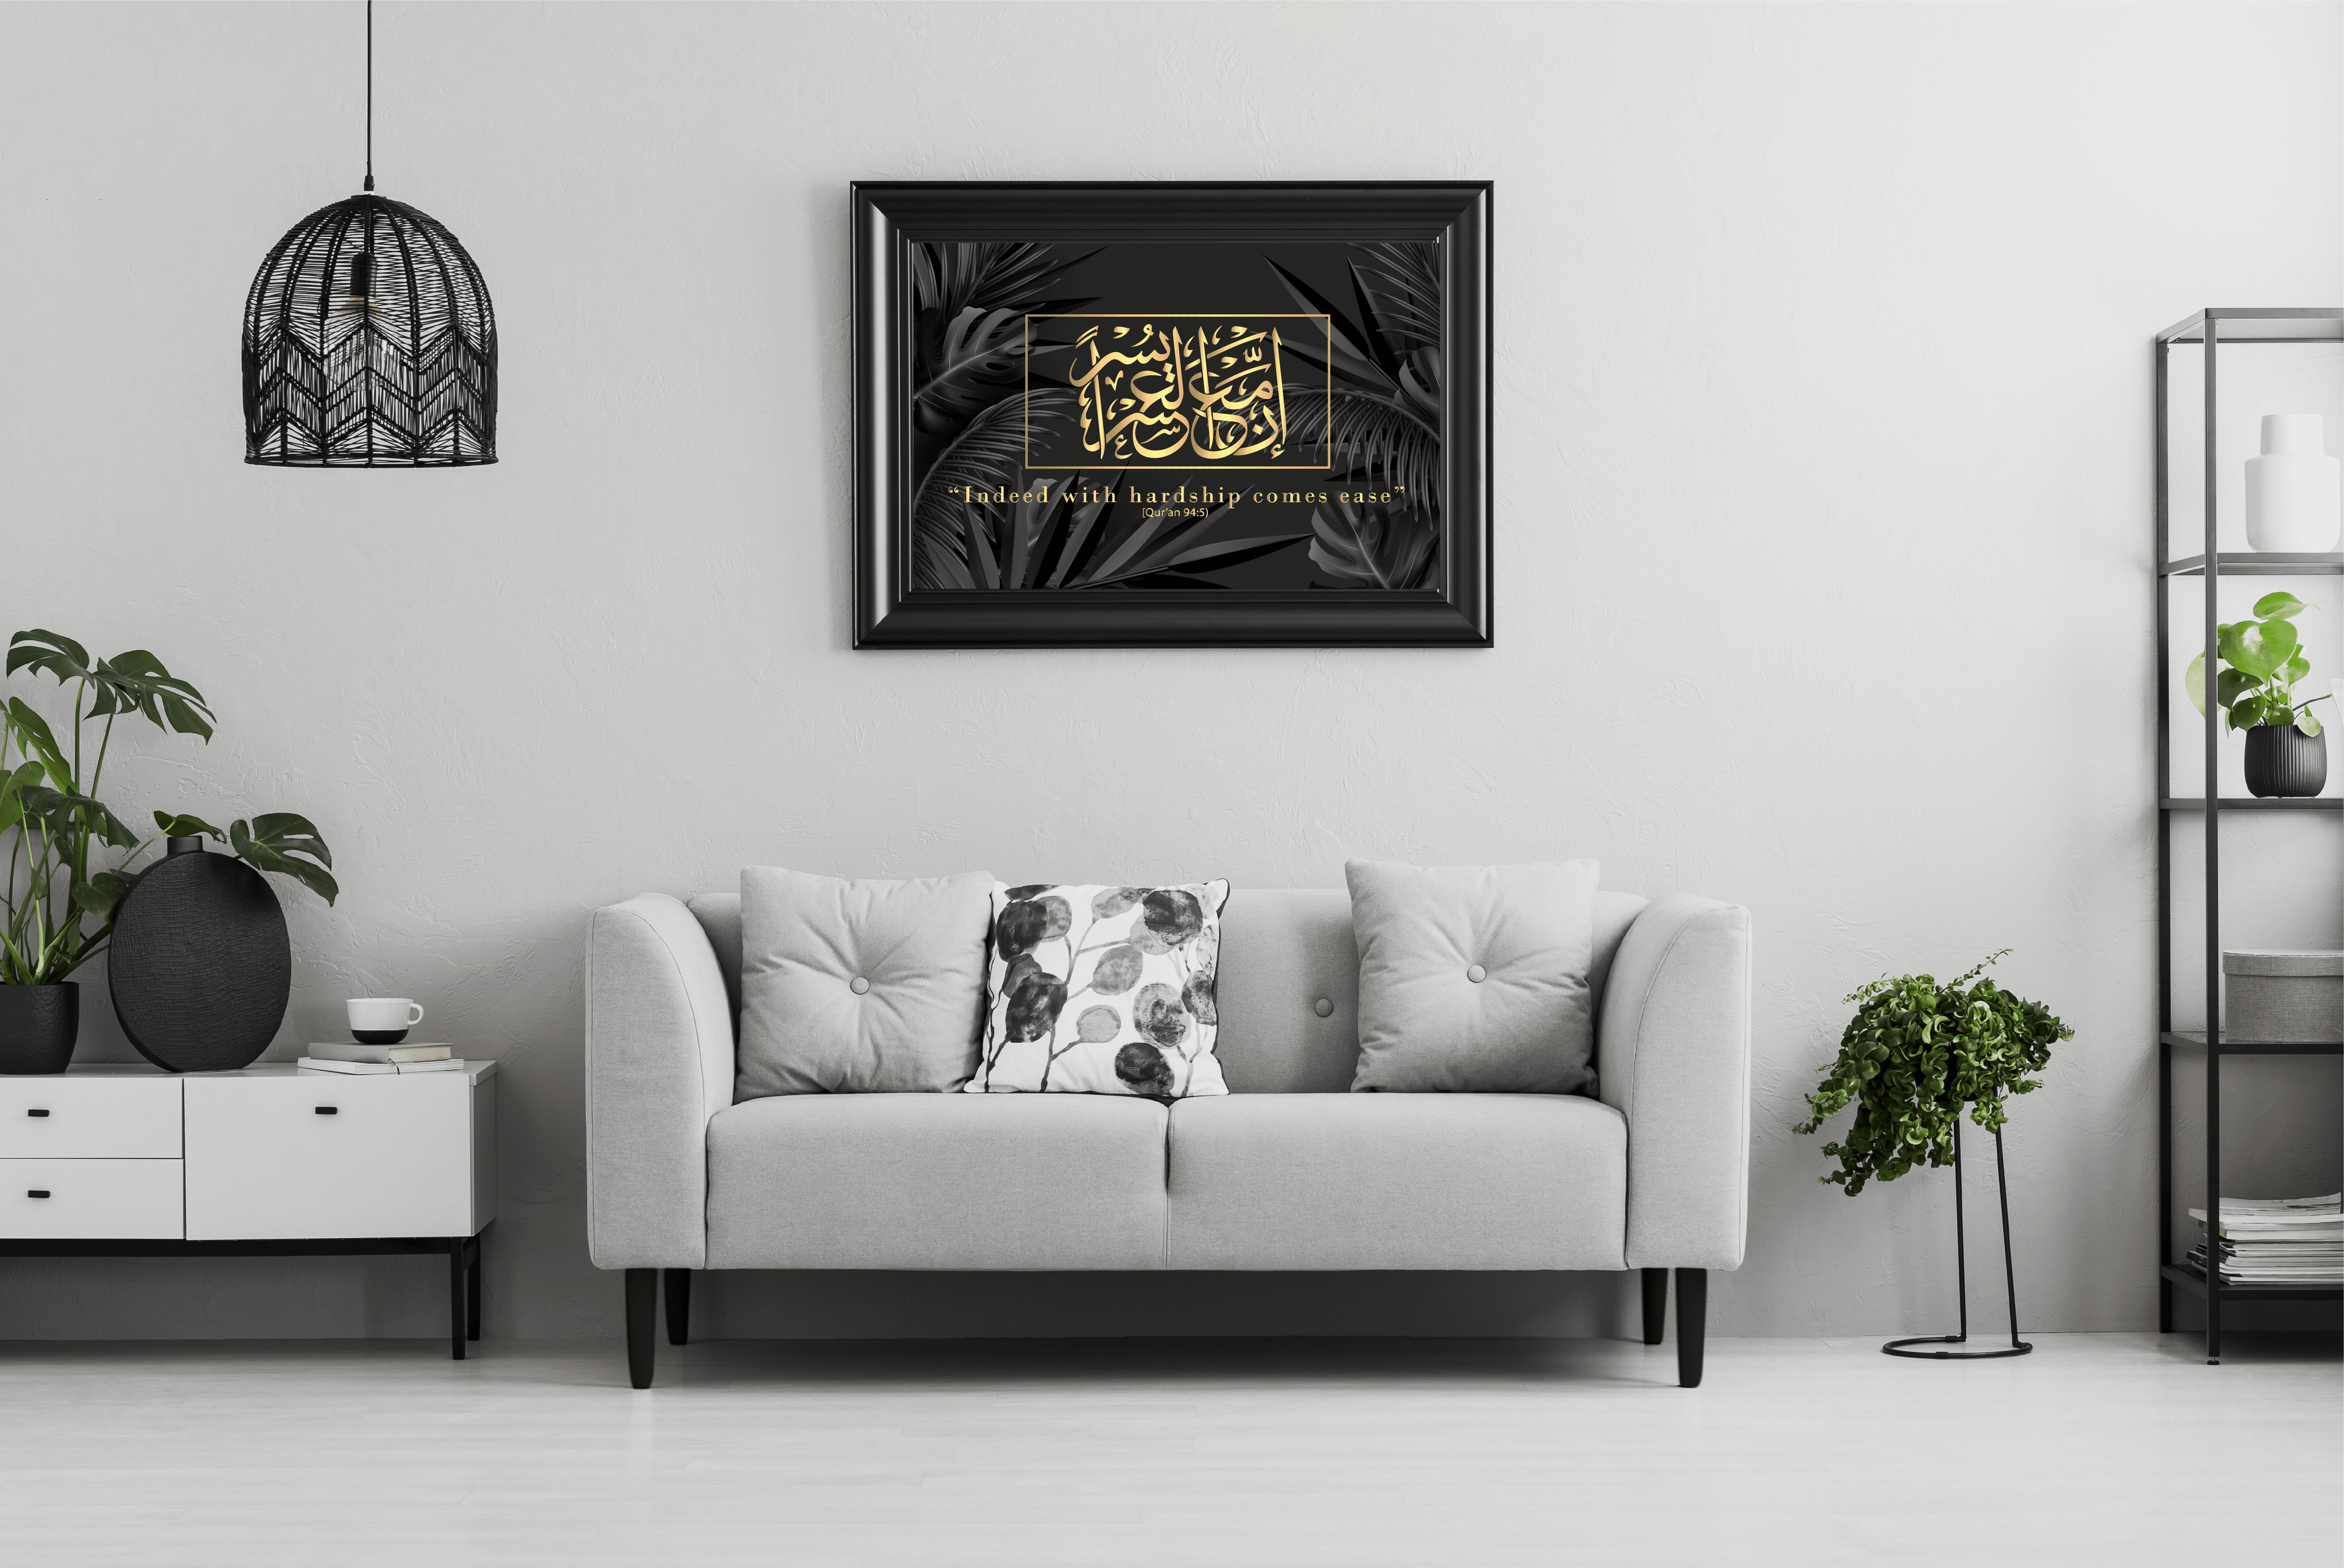 Quote from the Qur'an "Indeed with hardship comes ease" | Islamic wall art - Peaceful Arts